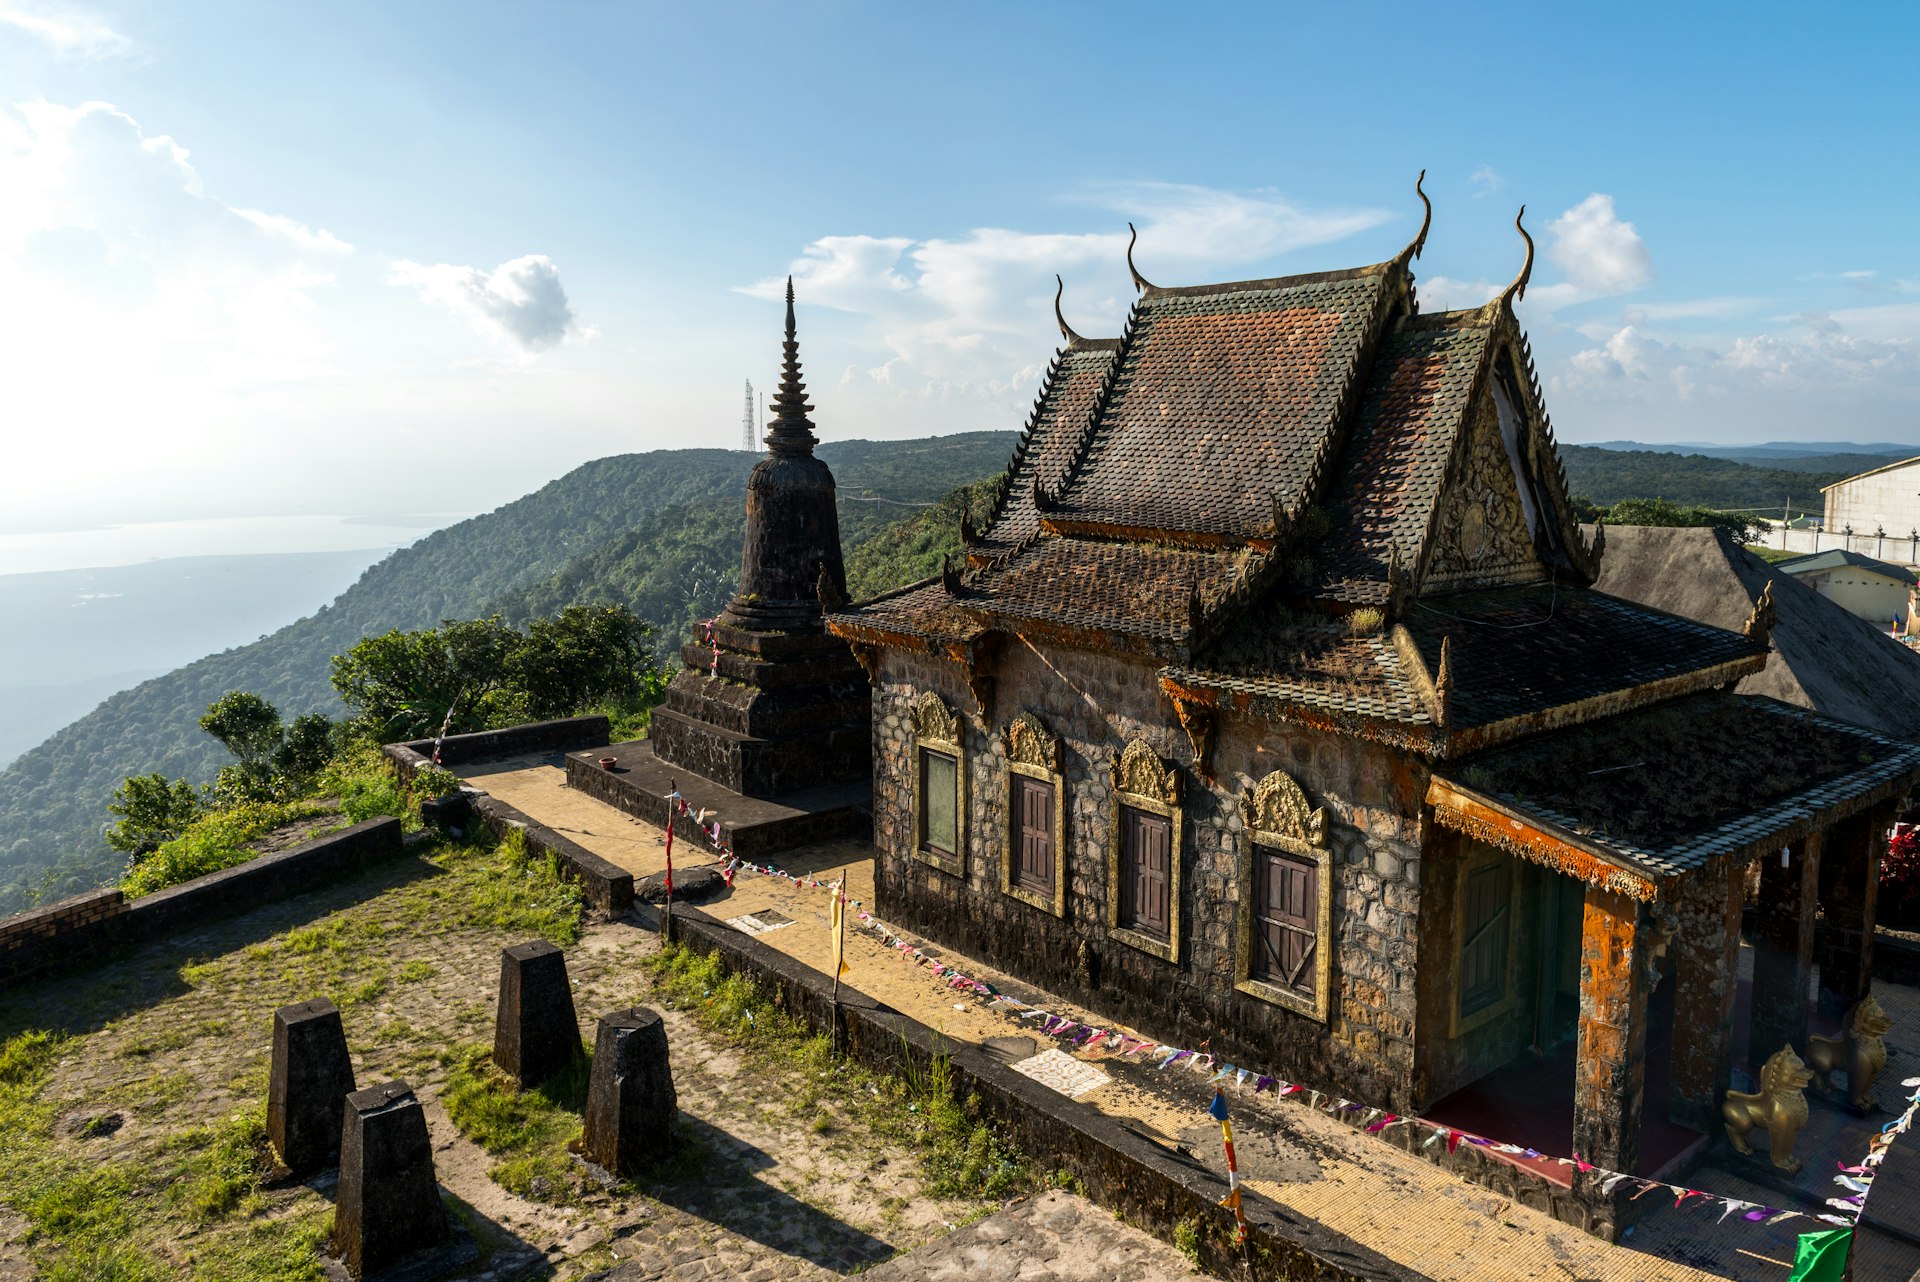 A Khmer temple at Bokor Hill Station in Cambodia, with view of sea beyond